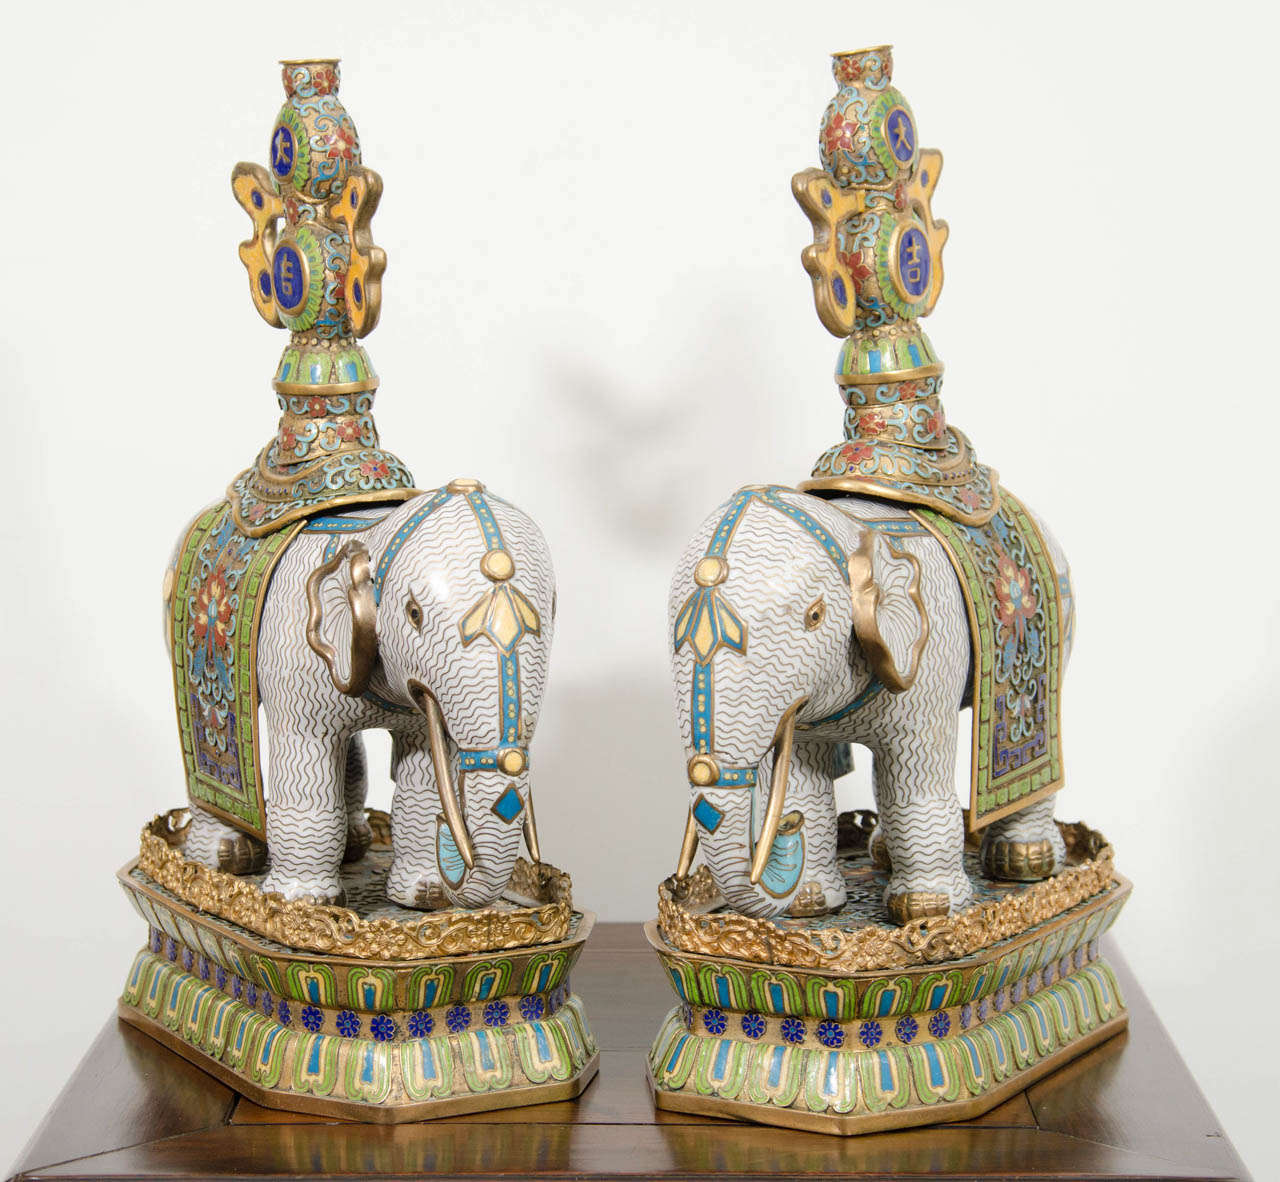 A pair of Chinese late Qing Dynasty gilt bronze elephants in colored cloisonne and champleve enamel and decorated with double gourd urns on their saddle carpets.  Each urn is marked, 